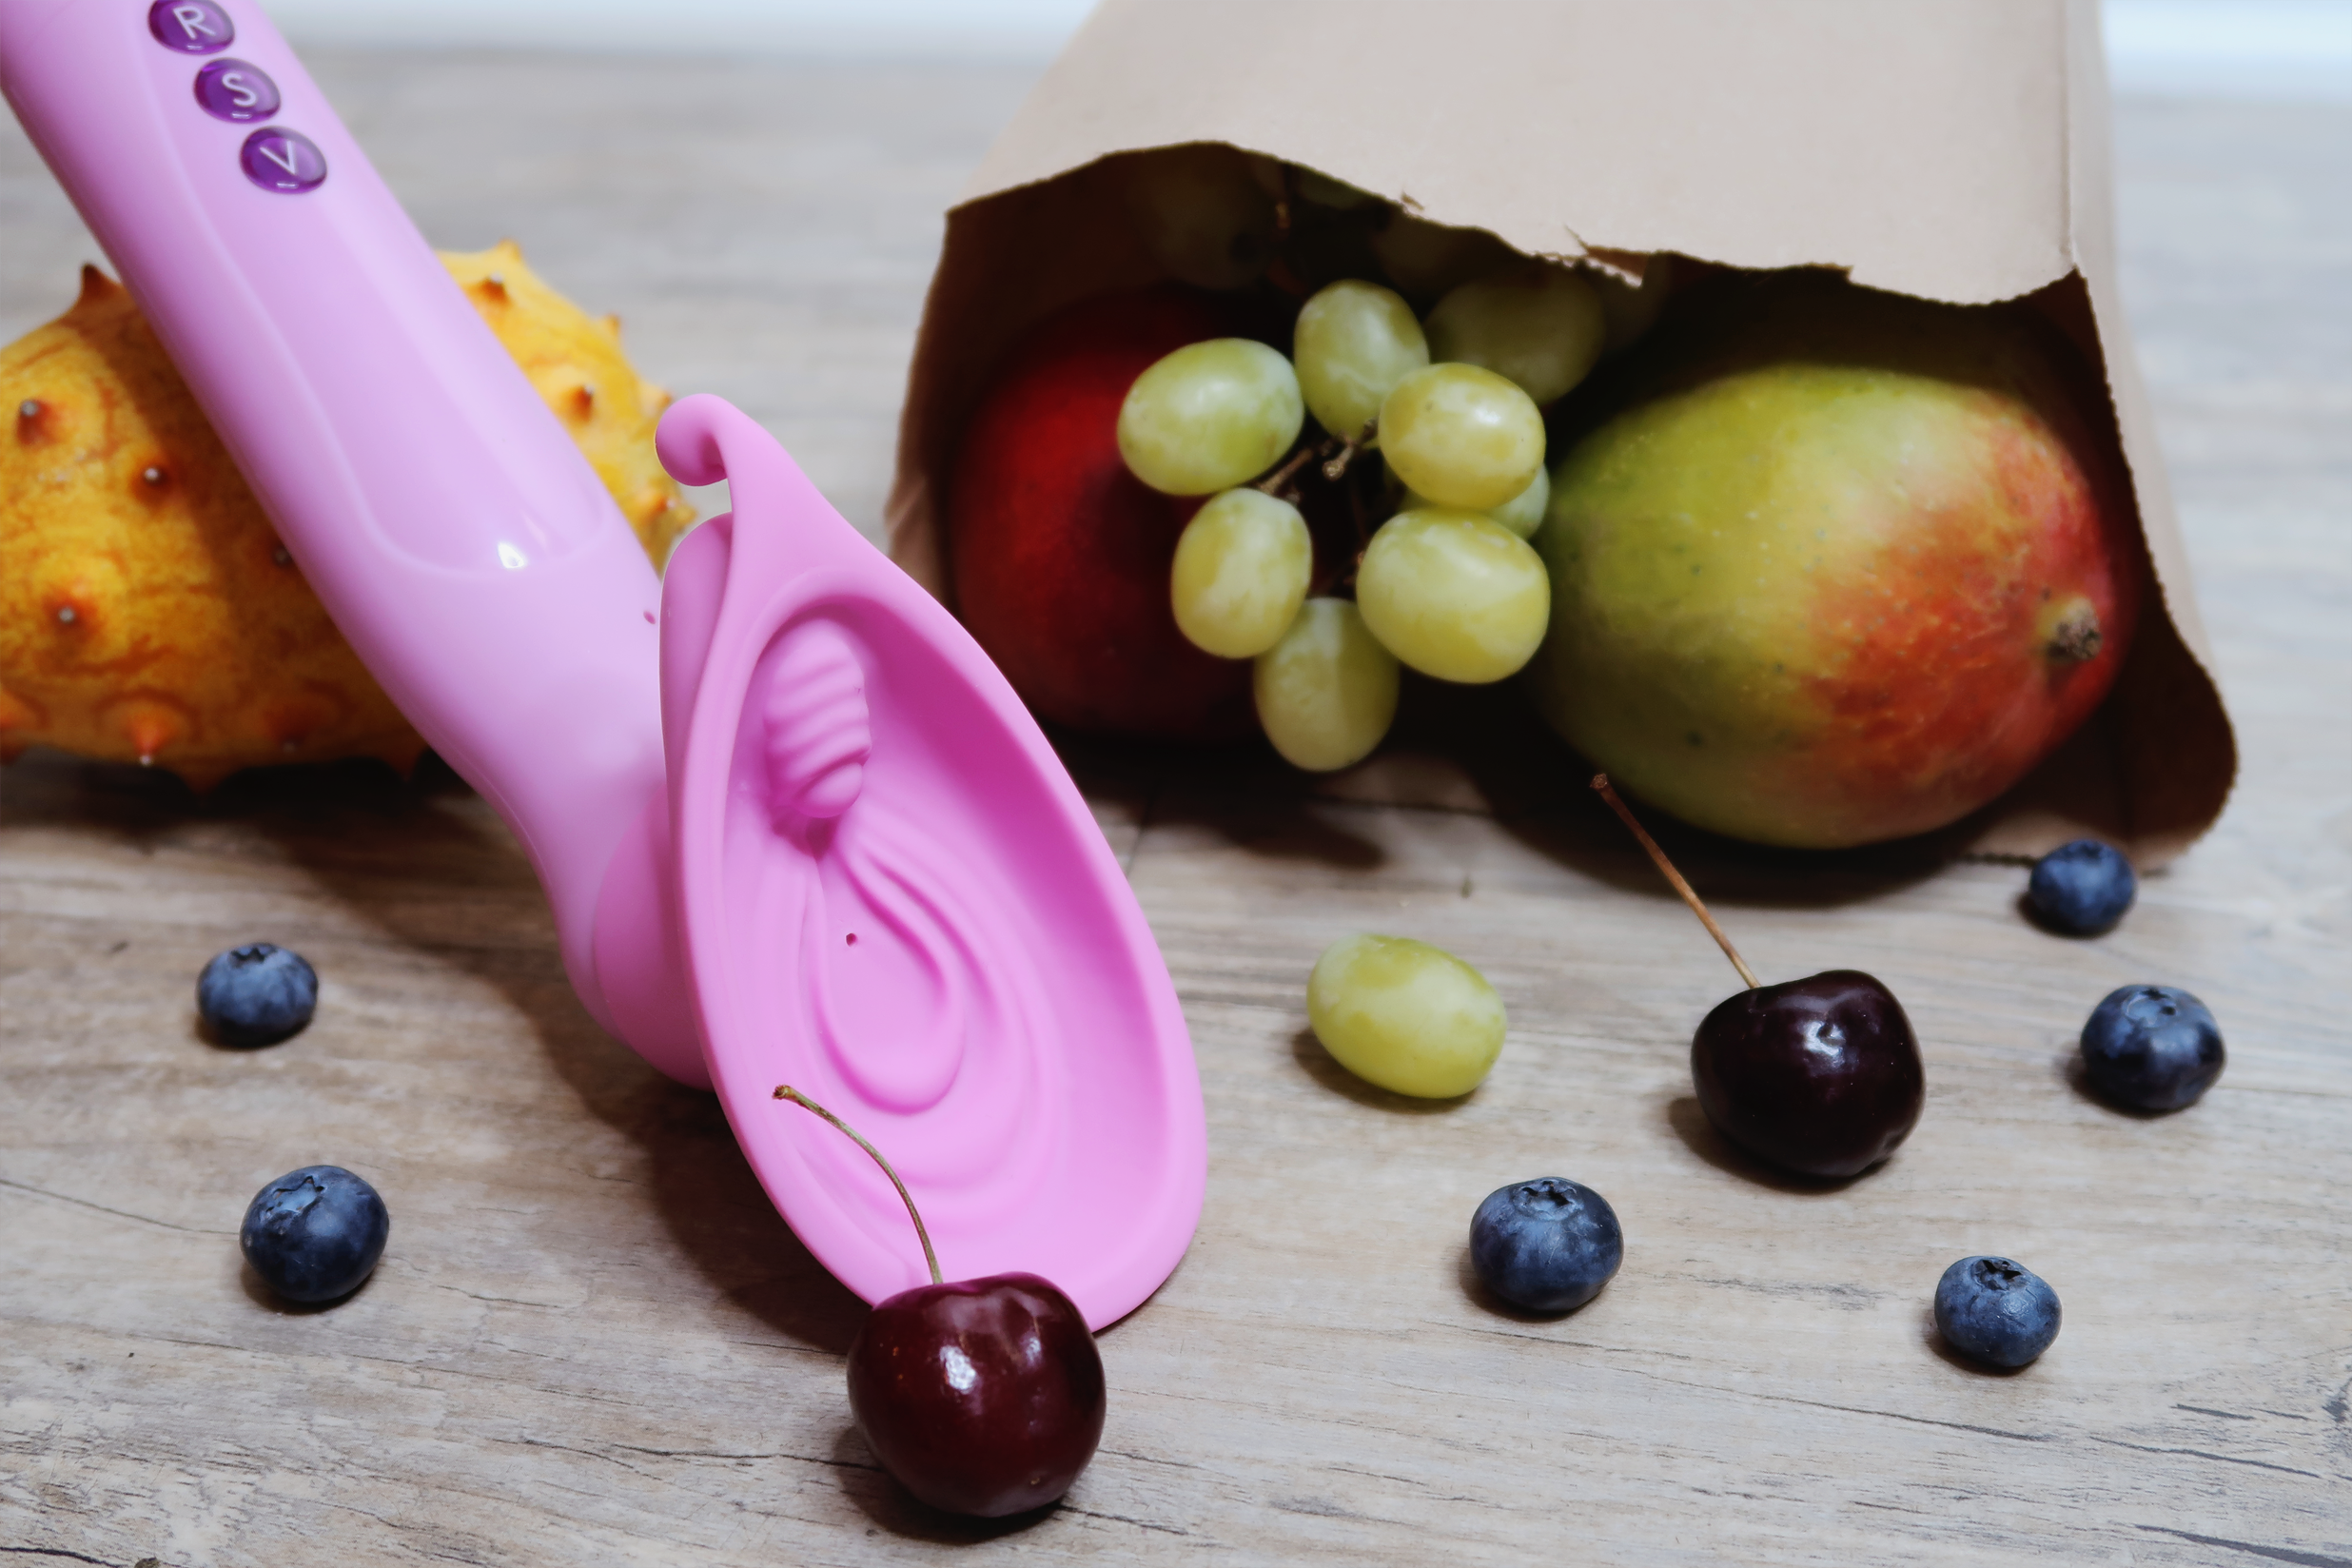 A light purple vibrator laying next to an open paper bag that has fruit spilling out. The vibrator has a vulva-shaped cup at the end that serves as a pump.